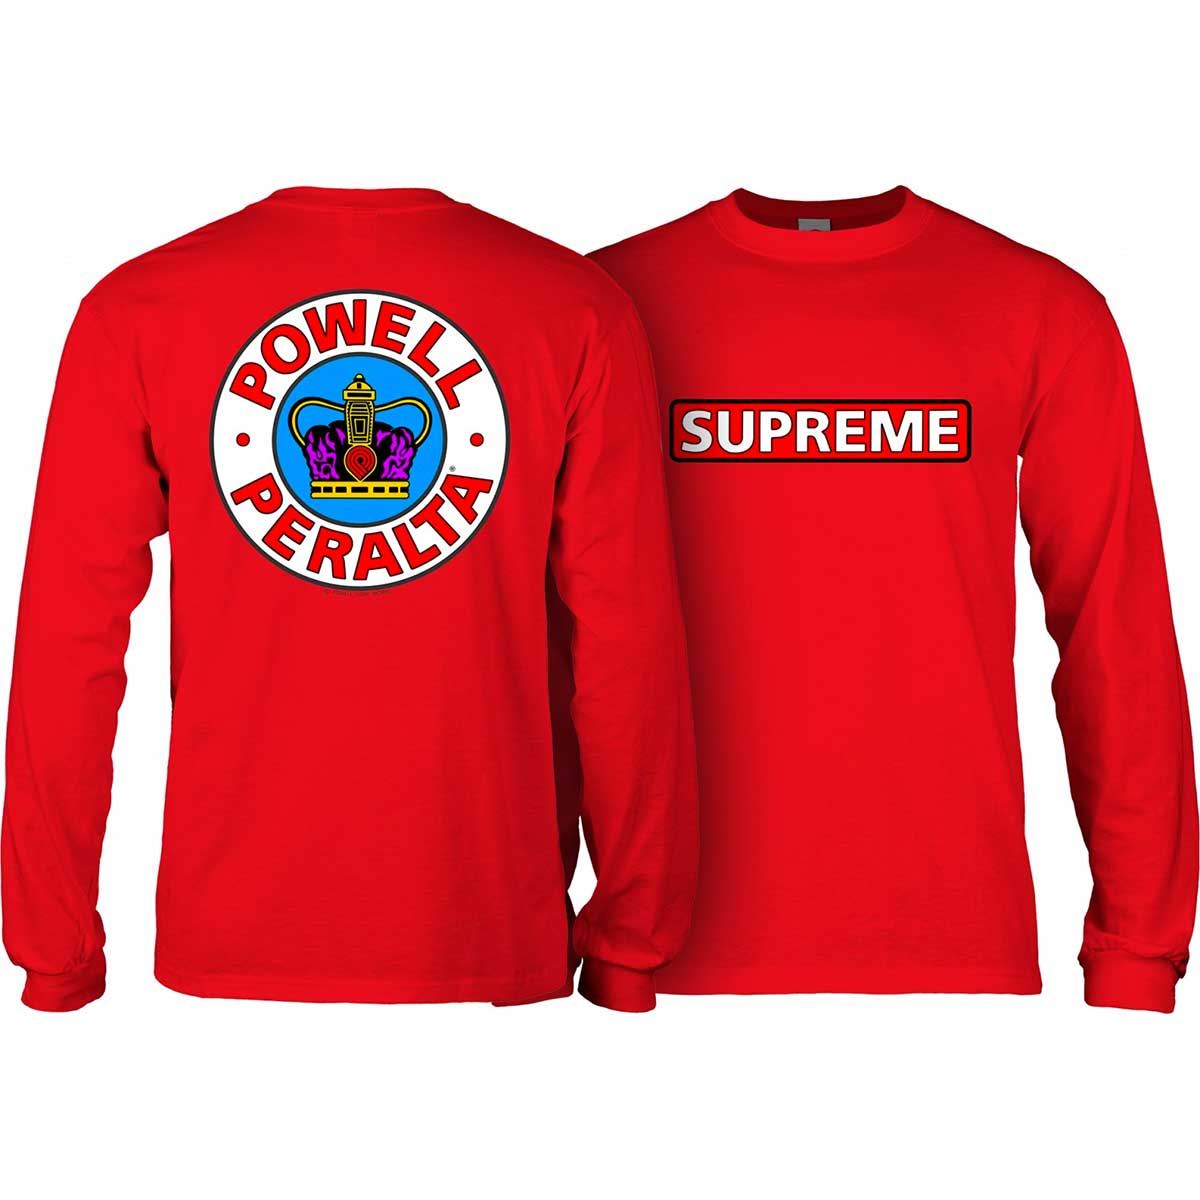 Powell Peralta Supreme Long Sleeve T-Shirt - Red